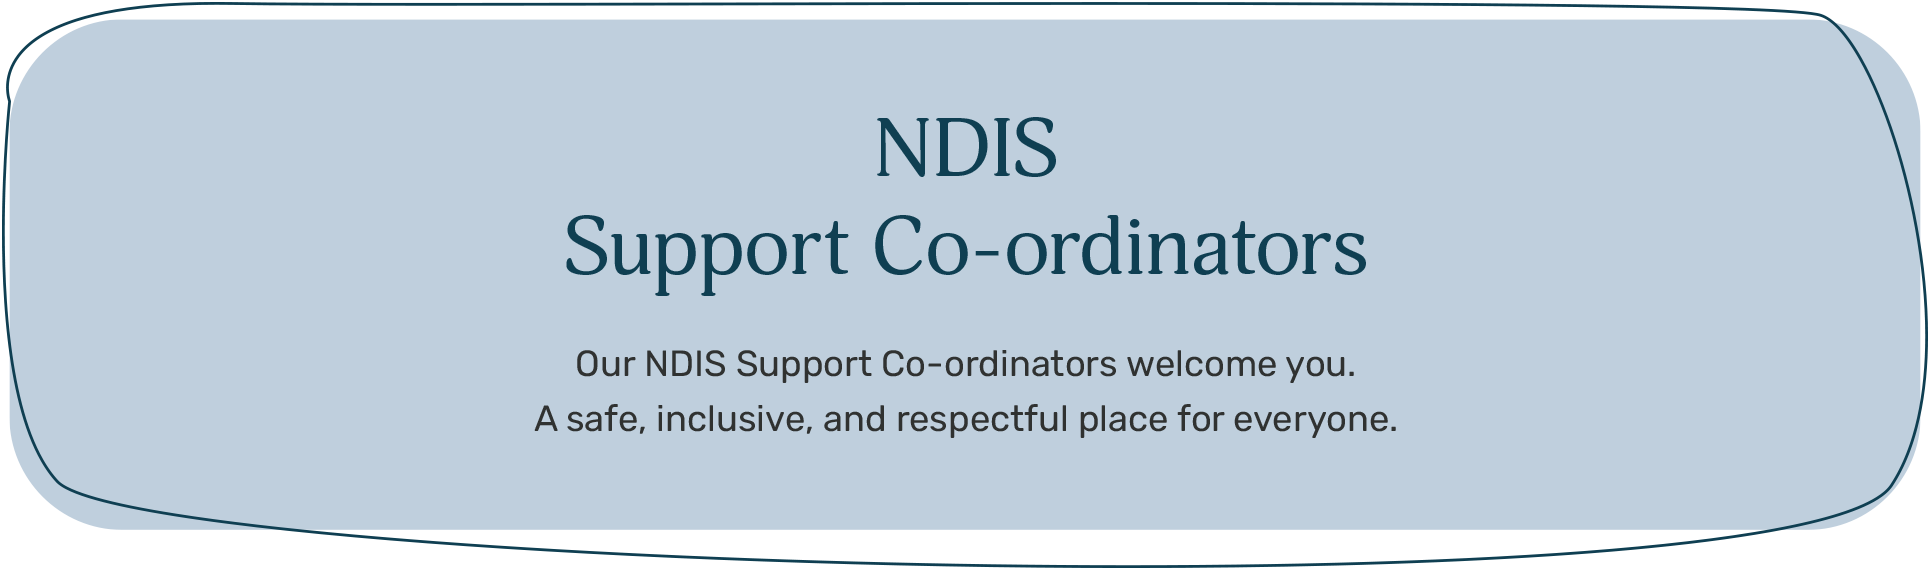 Kyogle Family Support Services - NDIS Support Co-ordinators